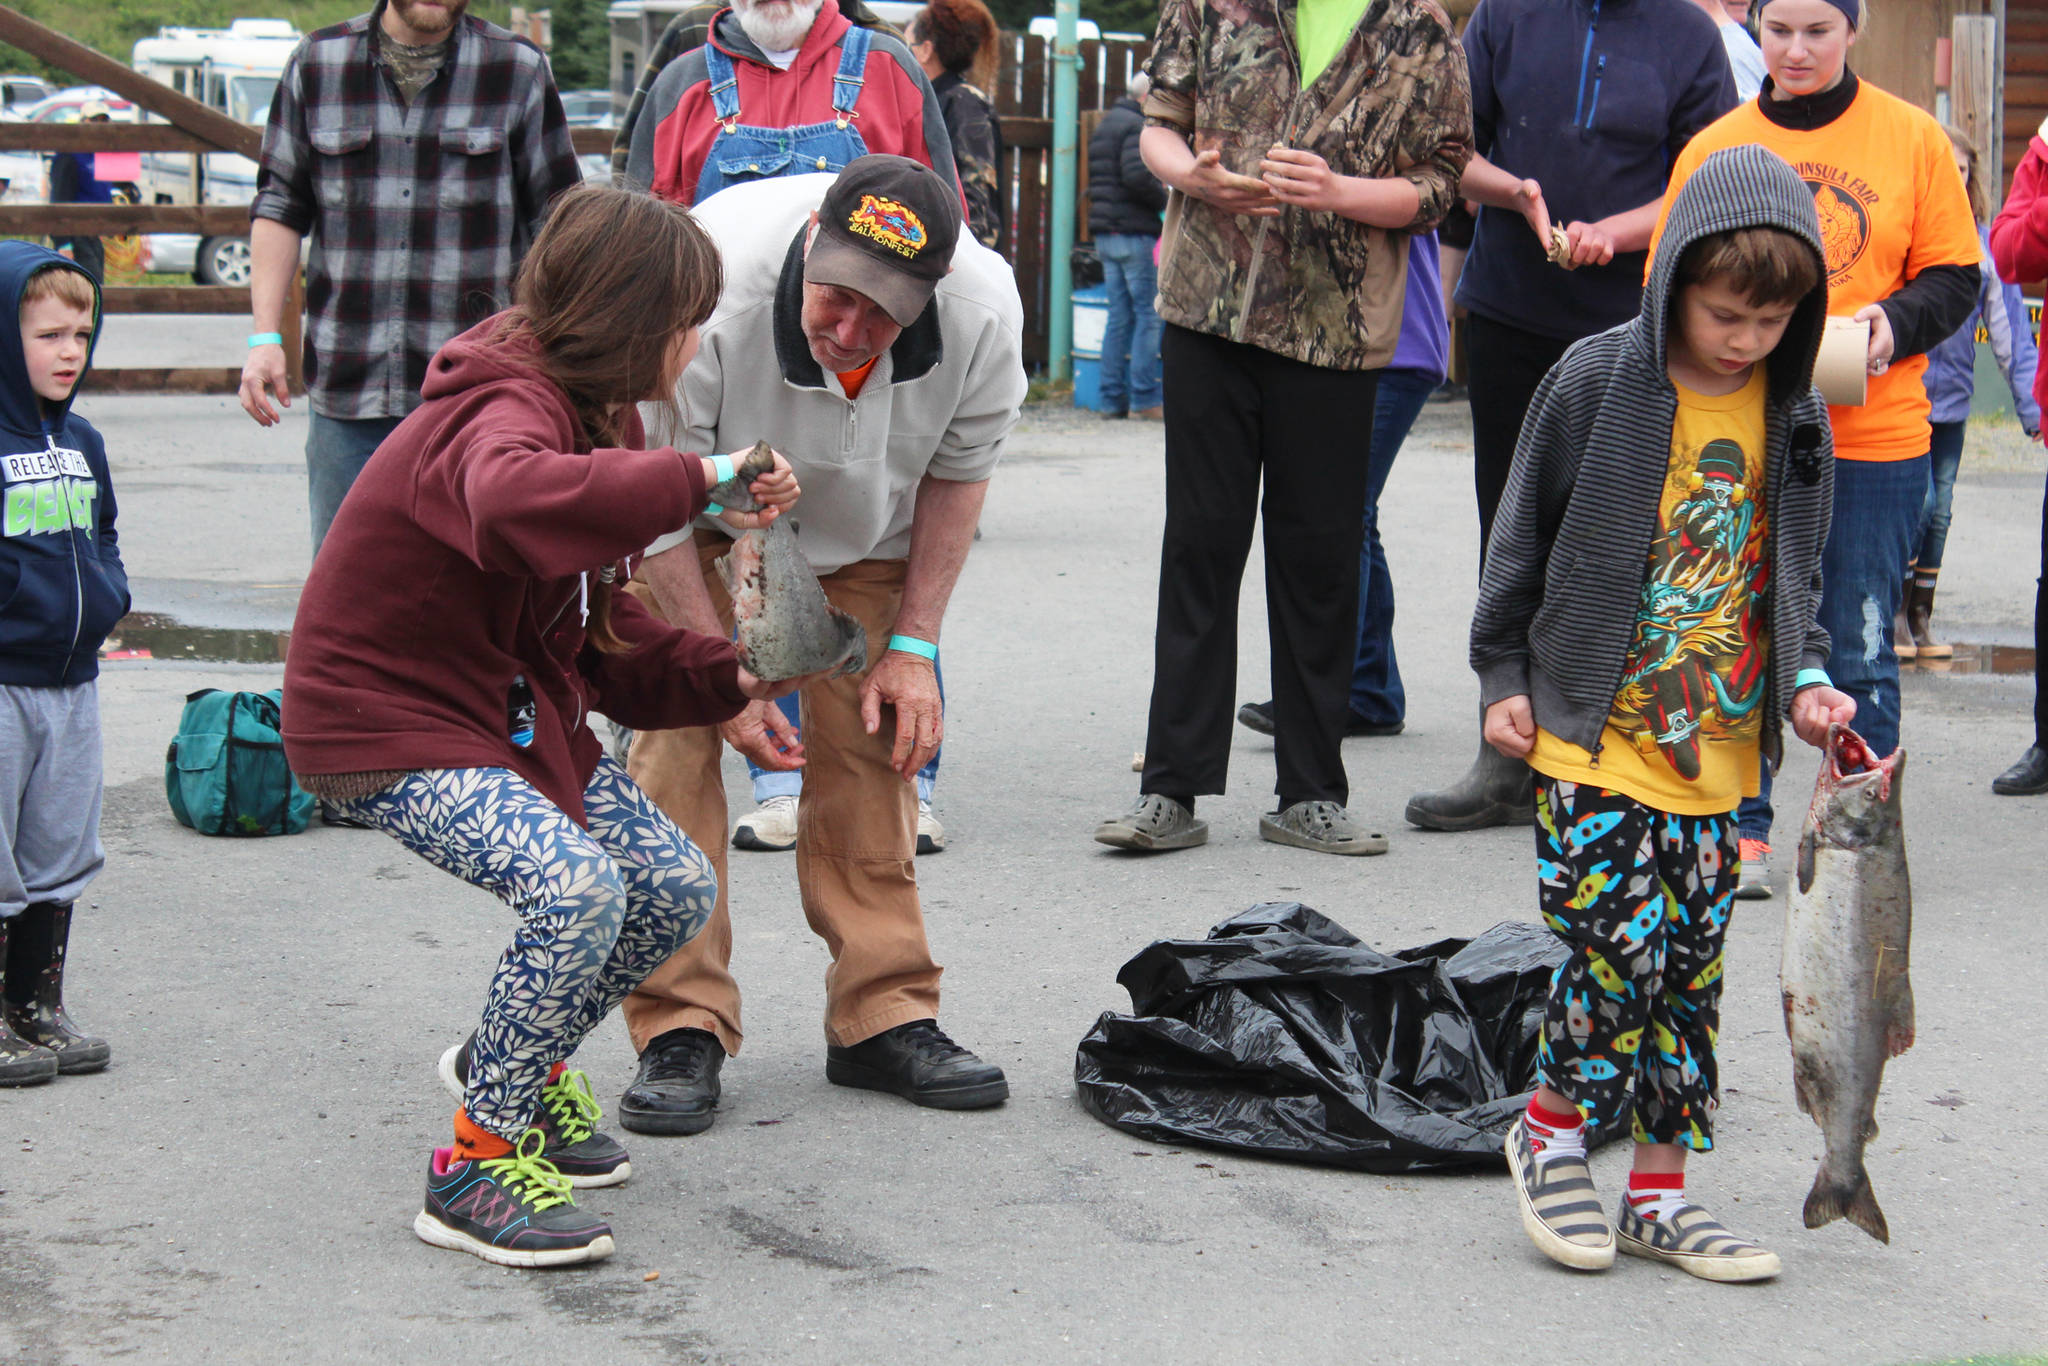 Kenai Peninsula Fair Board President Jim Sterns gives two young children some advice before they participate in the “fish toss,” an event held every year as part of the fair, on Saturday, Aug. 18, 2018 at the Kenai Peninsula Fairgrounds in Ninilchik, Alaska. (Photo by Megan Pacer/Homer News)